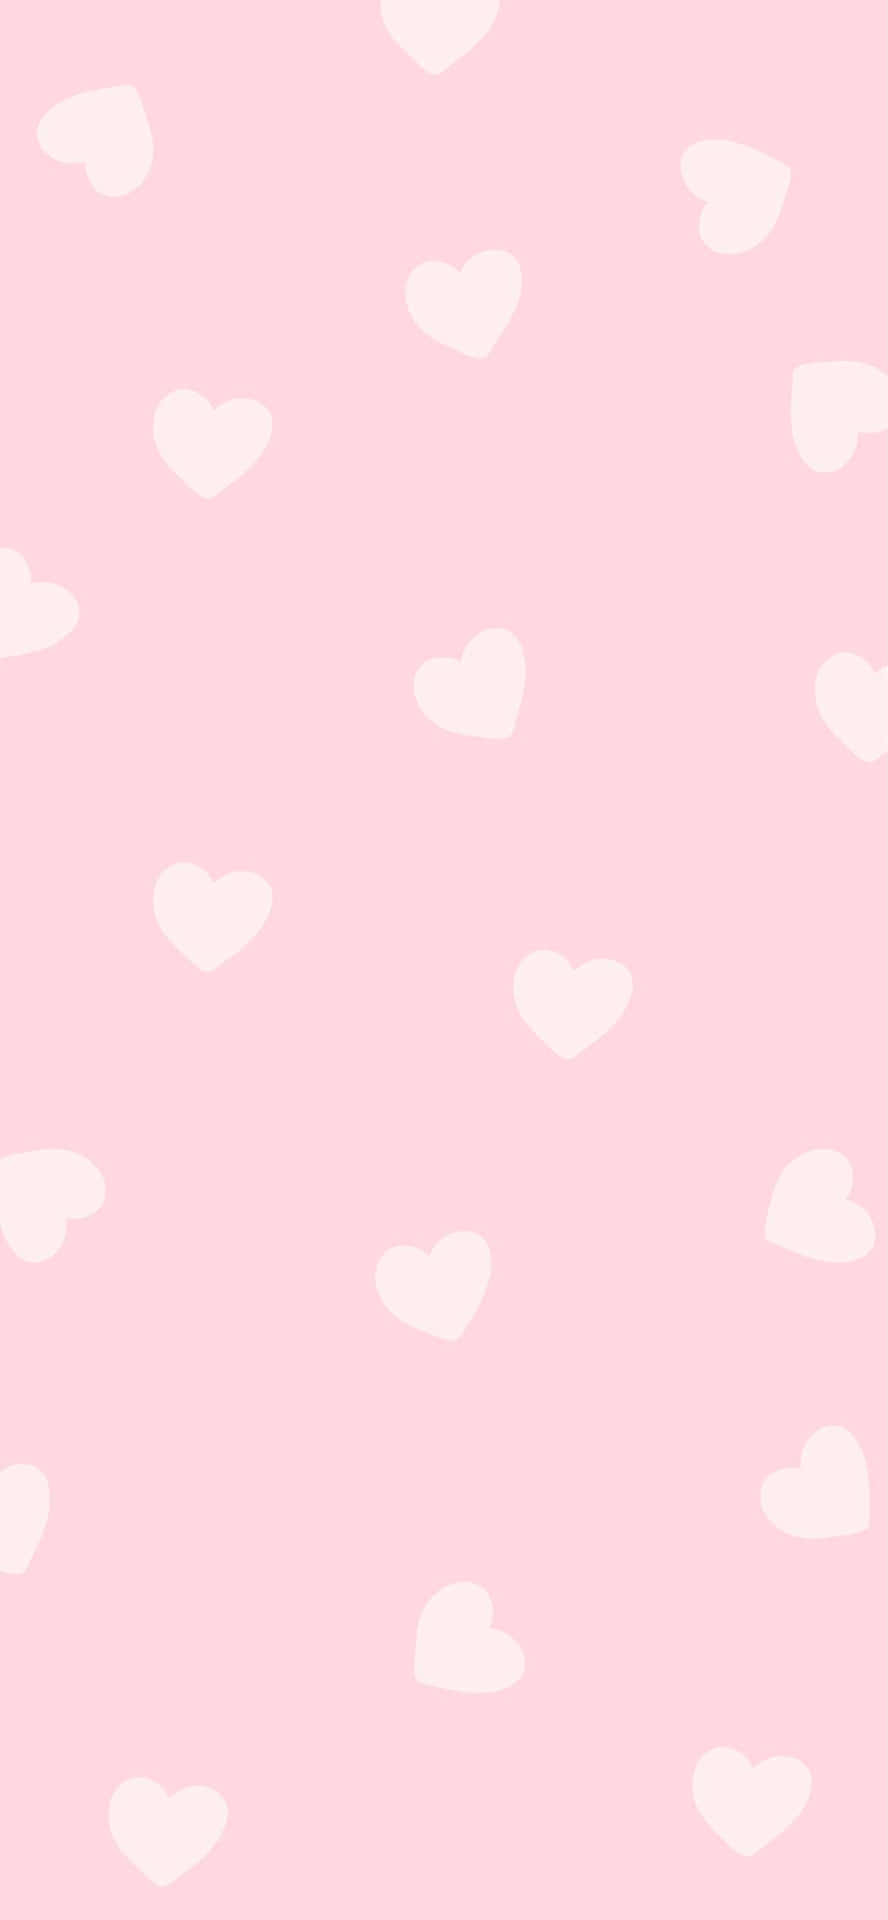 Download Pink Cute Background | Wallpapers.com